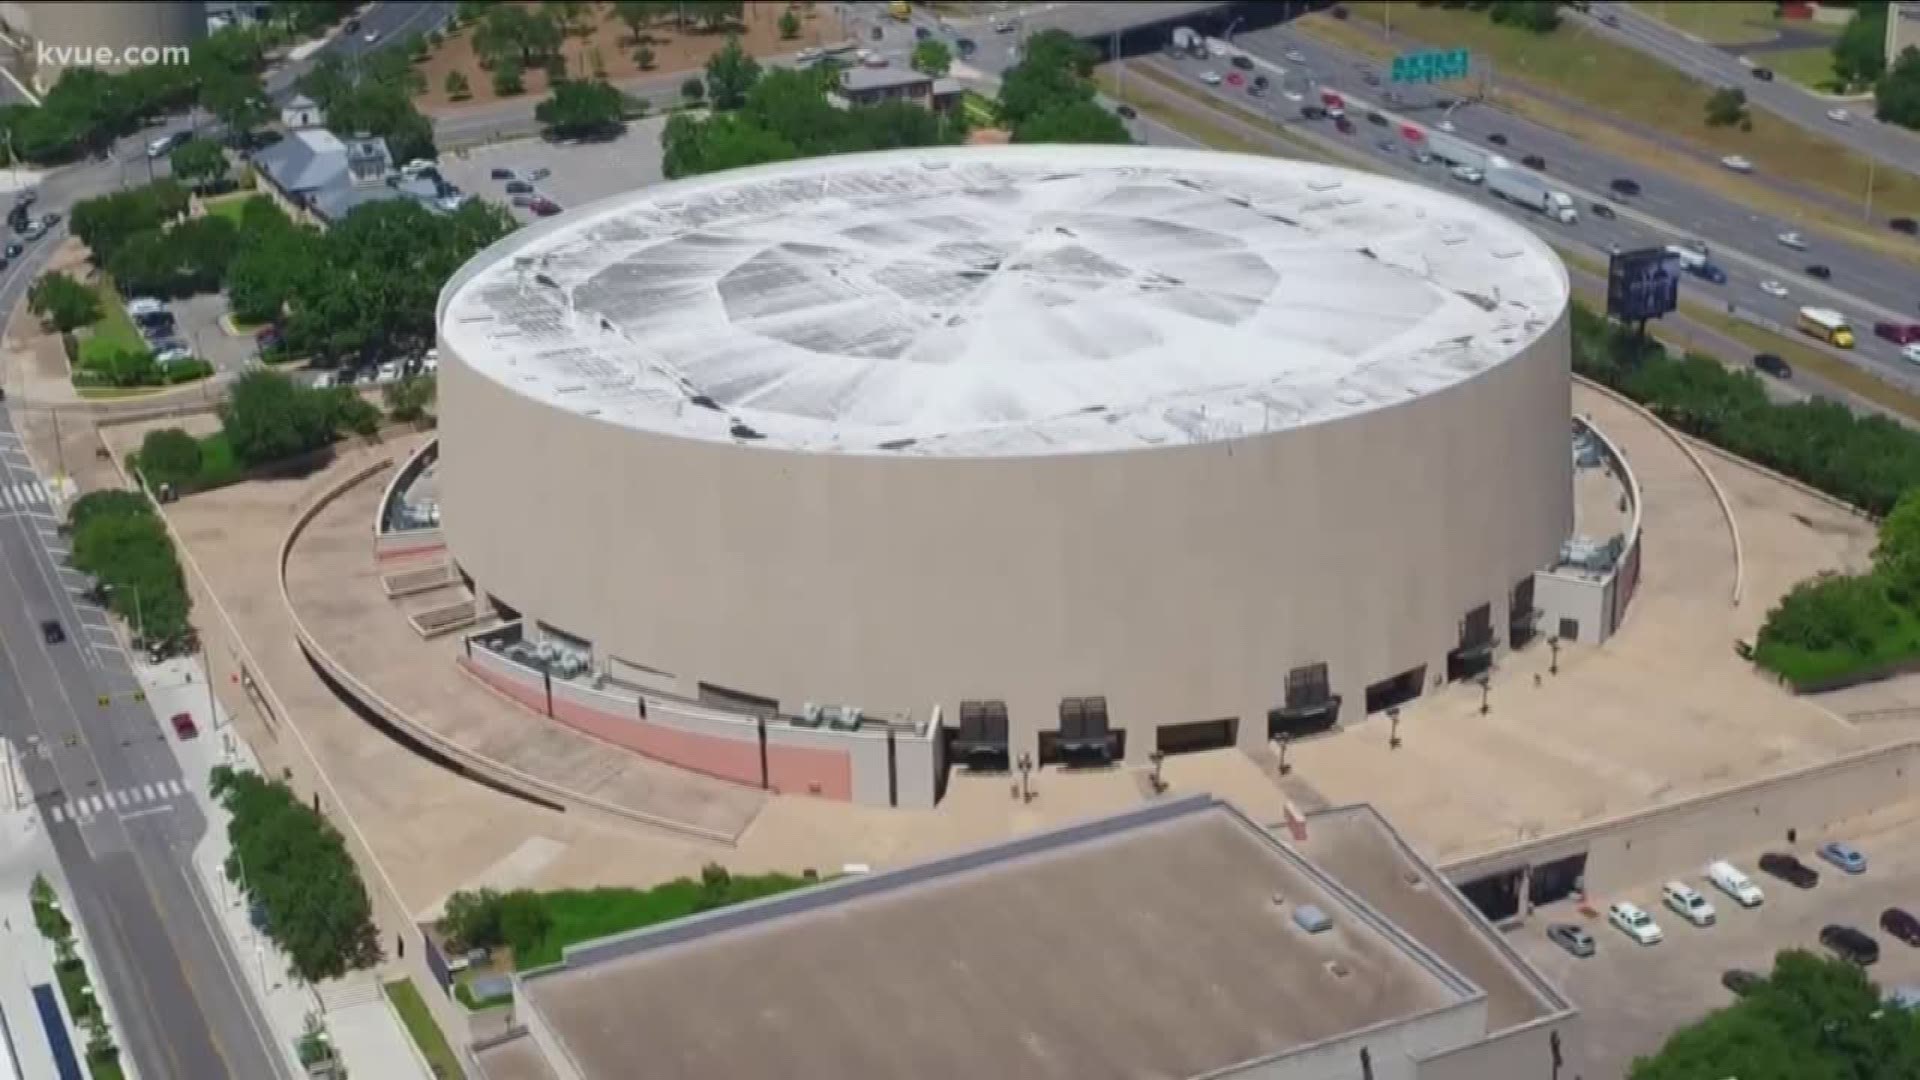 The University of Texas at Austin - 📣LIVE at 4PM: Learn about UT's new,  world-class basketball arena that will host the Texas Longhorns and benefit  the Austin community 🤘🤘 Watch press conference